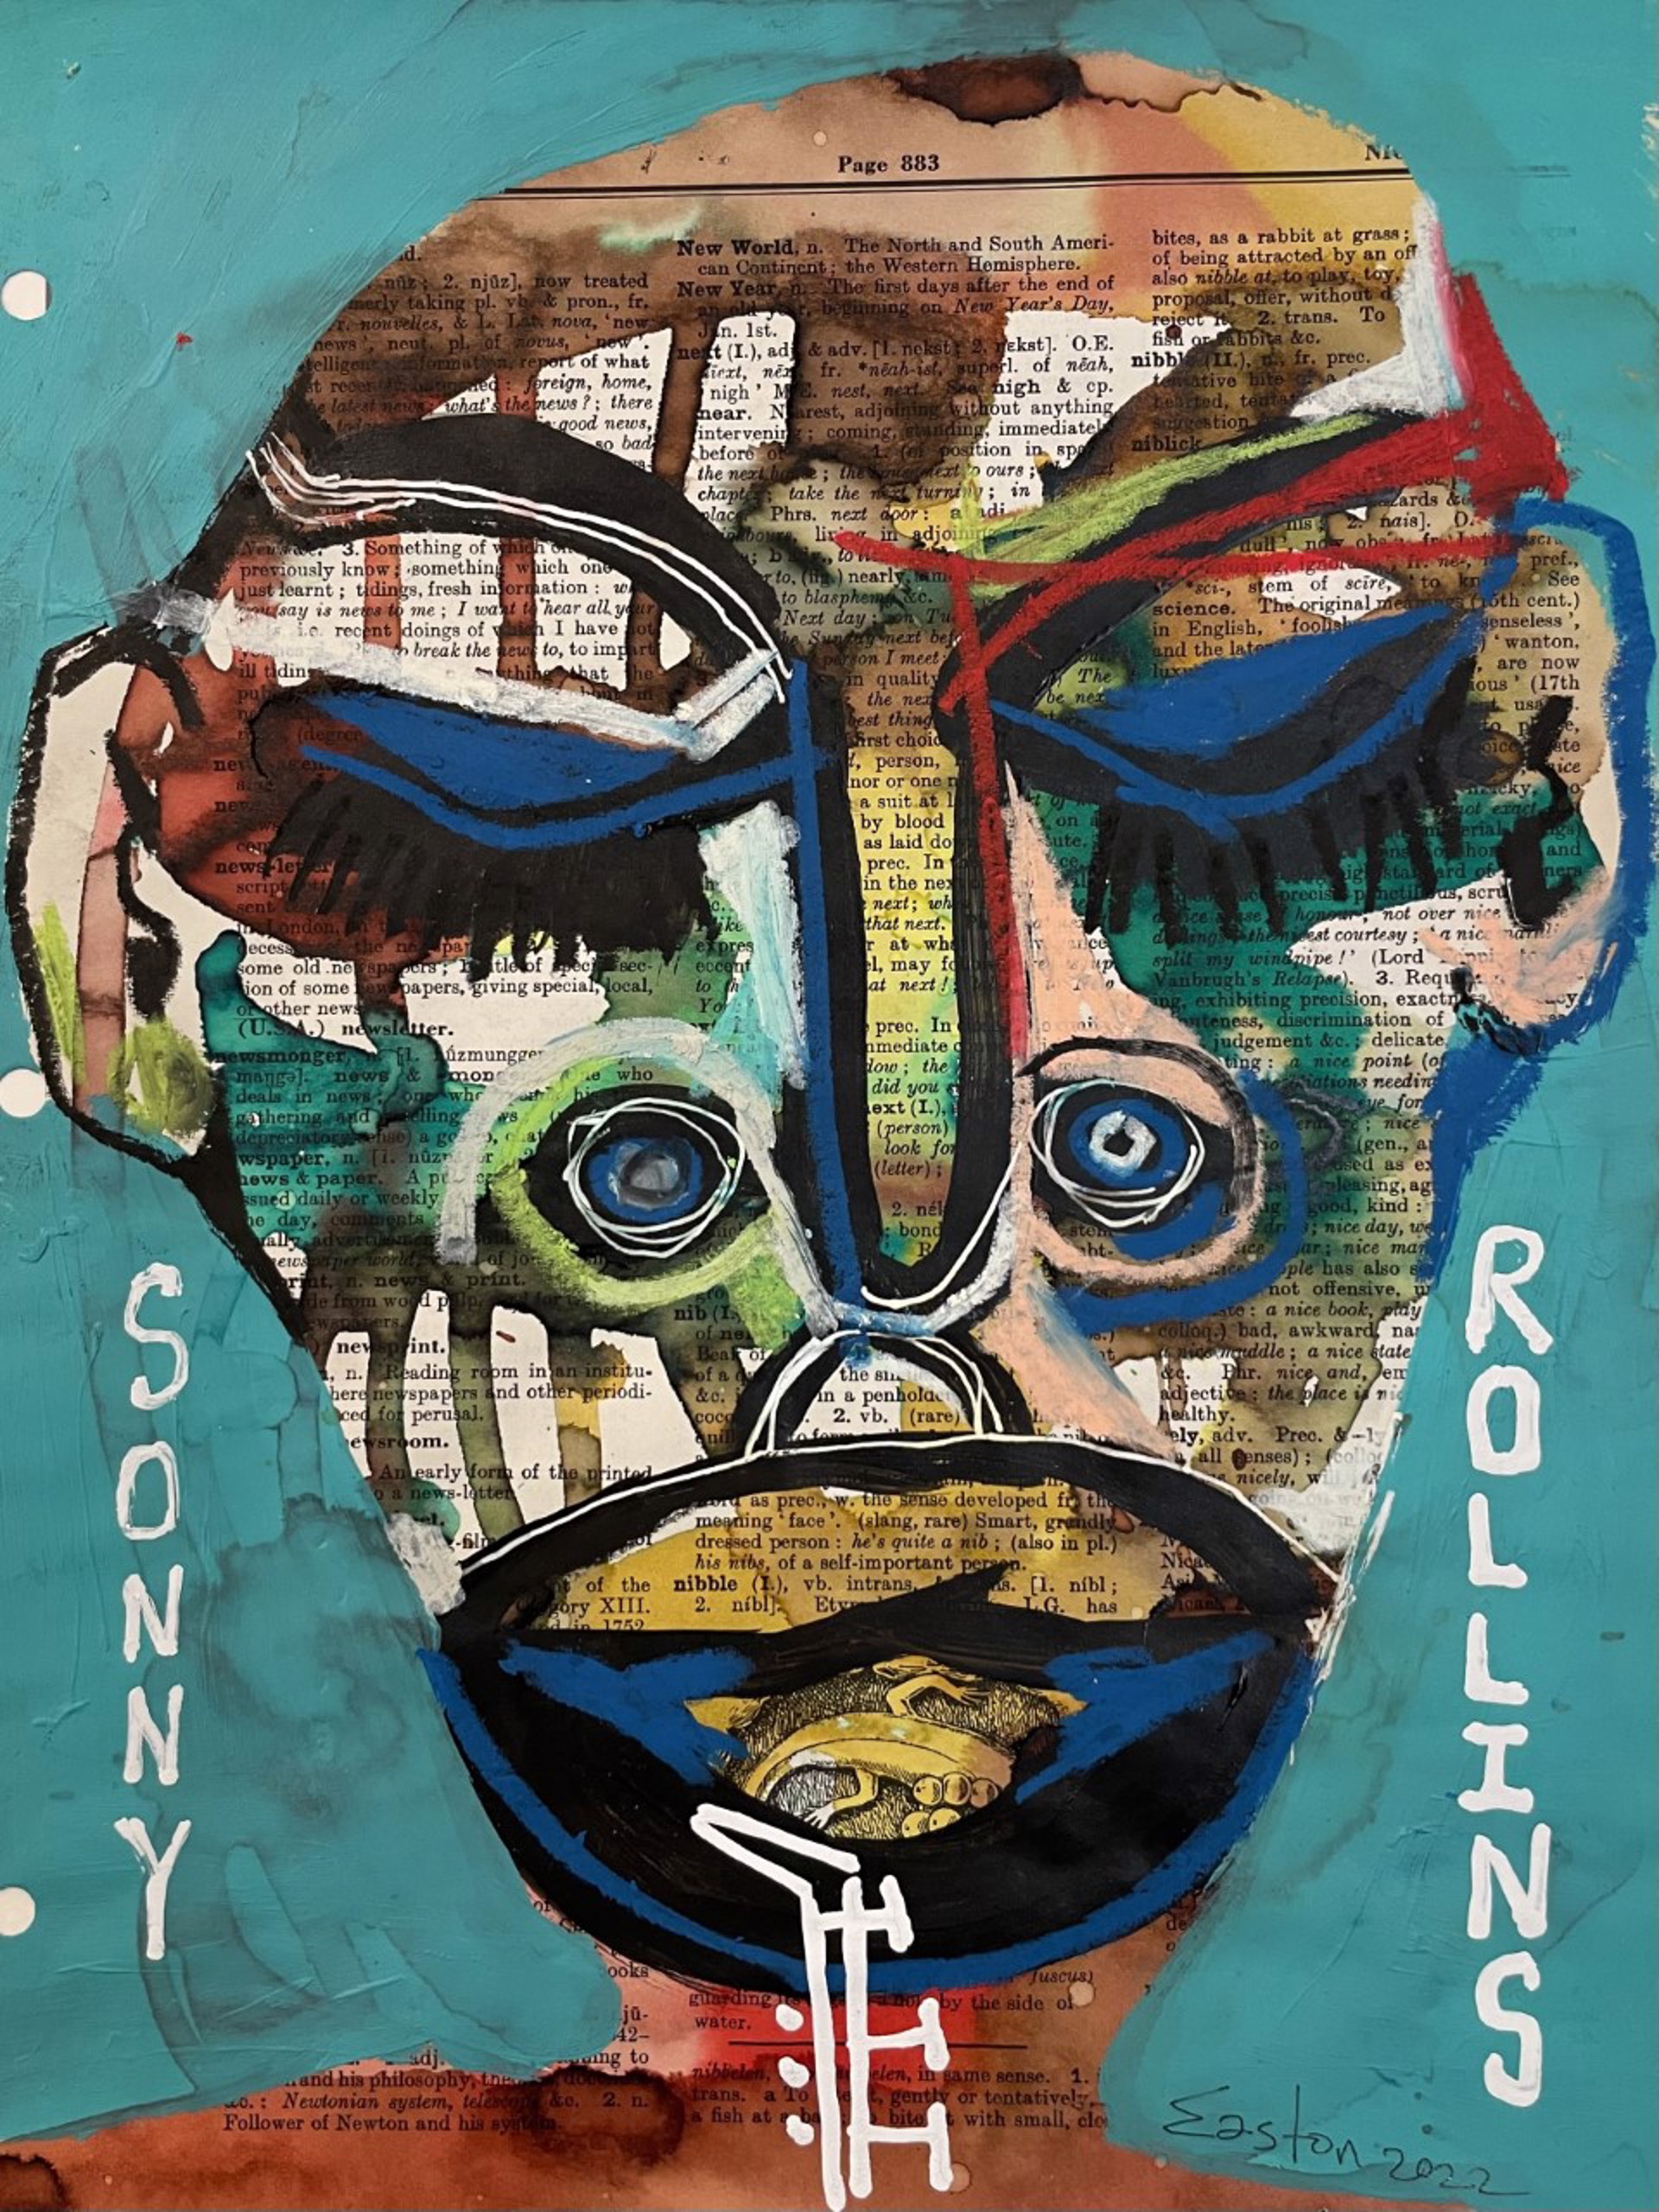 "Sonny Rollins" by Easton Davy